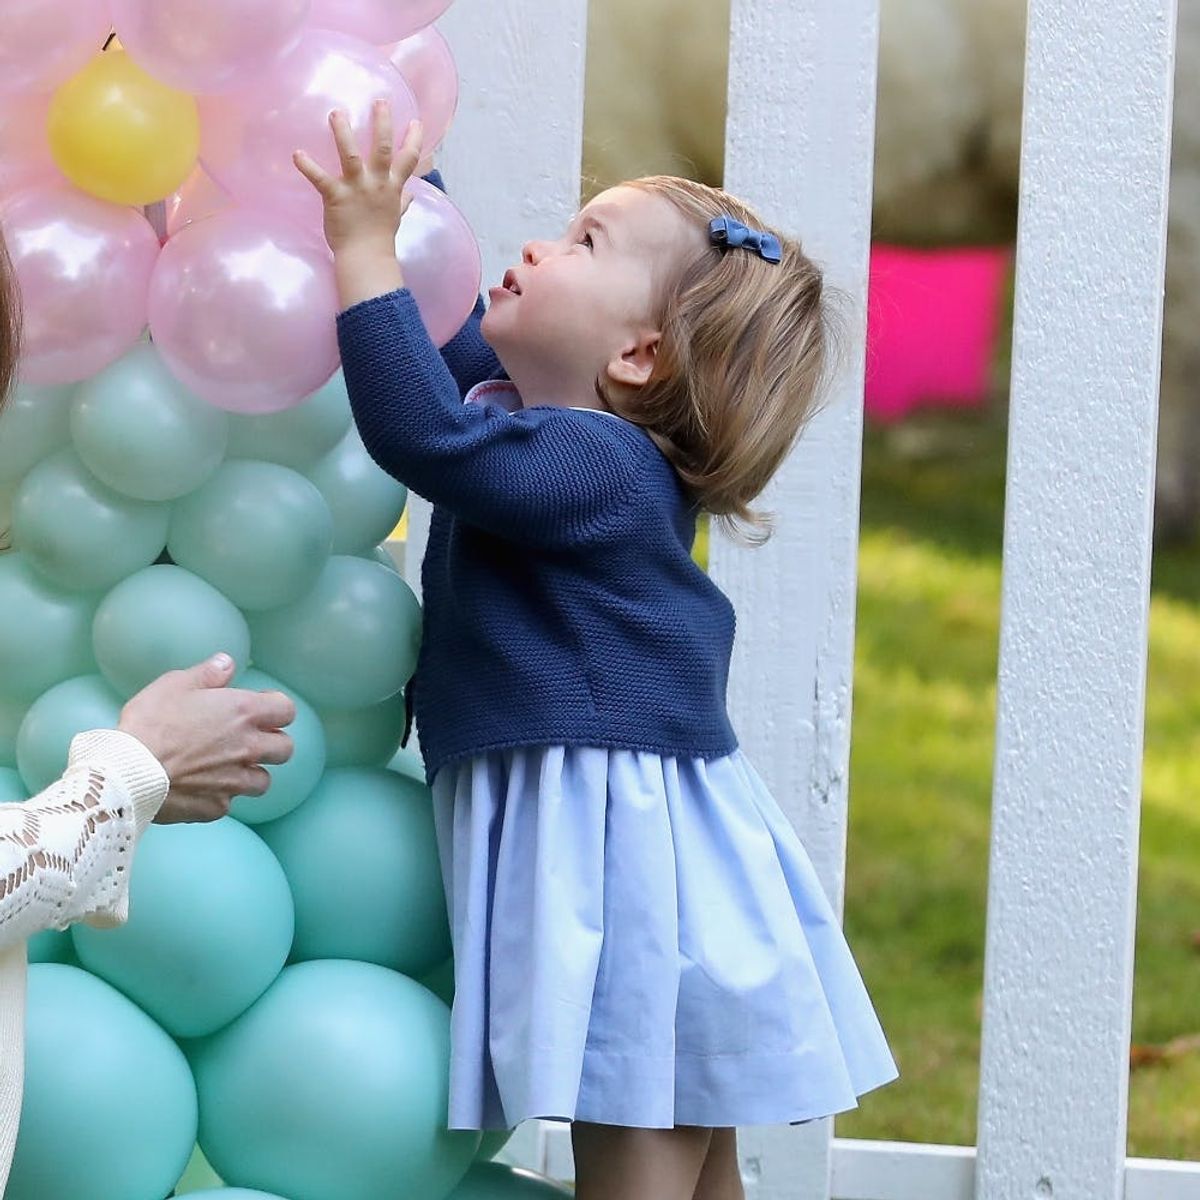 Princess Charlotte Freaking Out Over Balloons (and Walking!) Is the Best Thing You’ll See Today